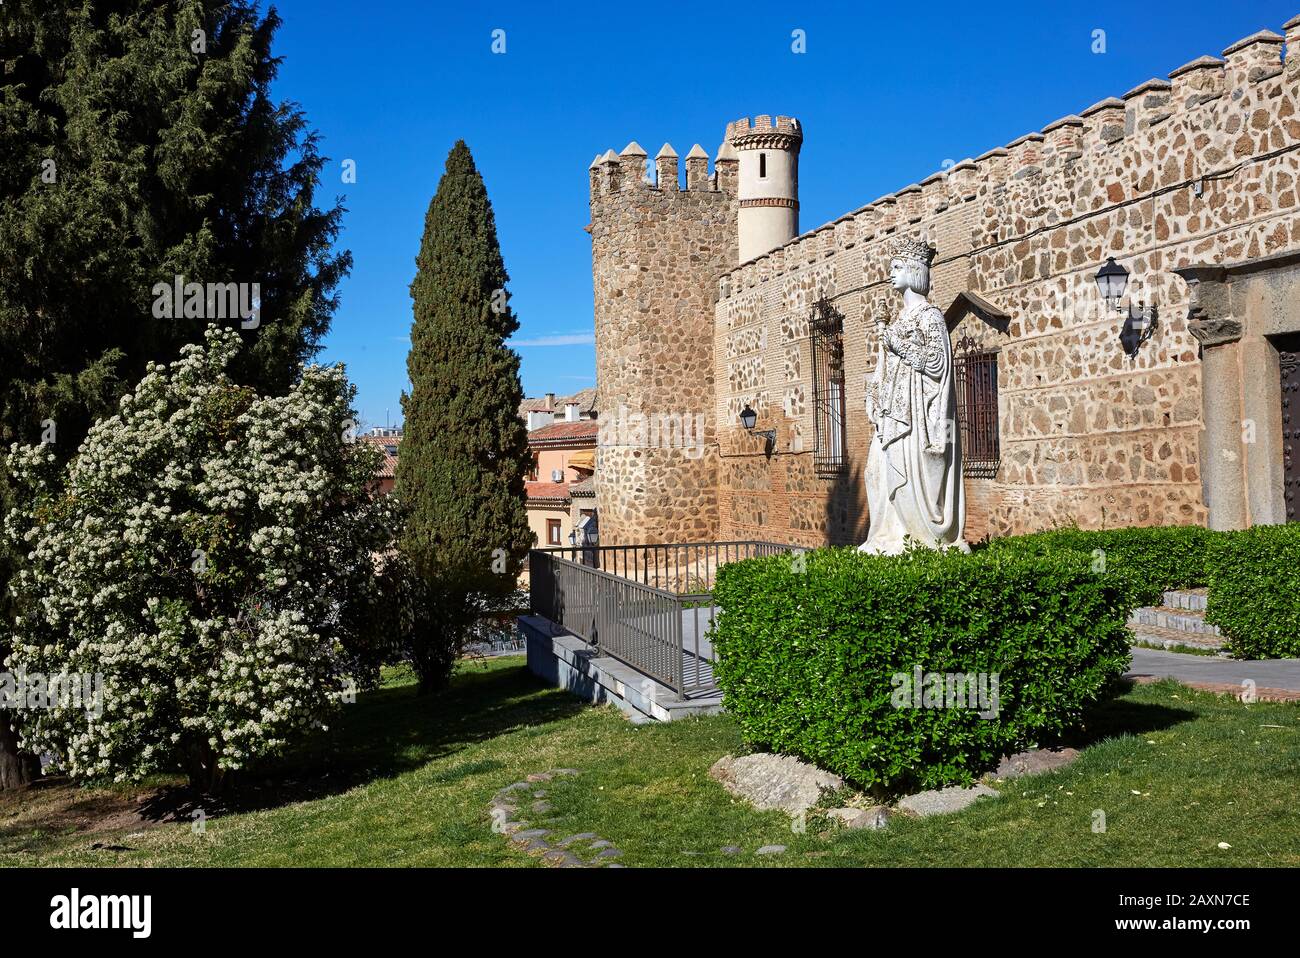 Castle walls and statue of 'Isabella 1 of Castile' with trees and blue skies Stock Photo